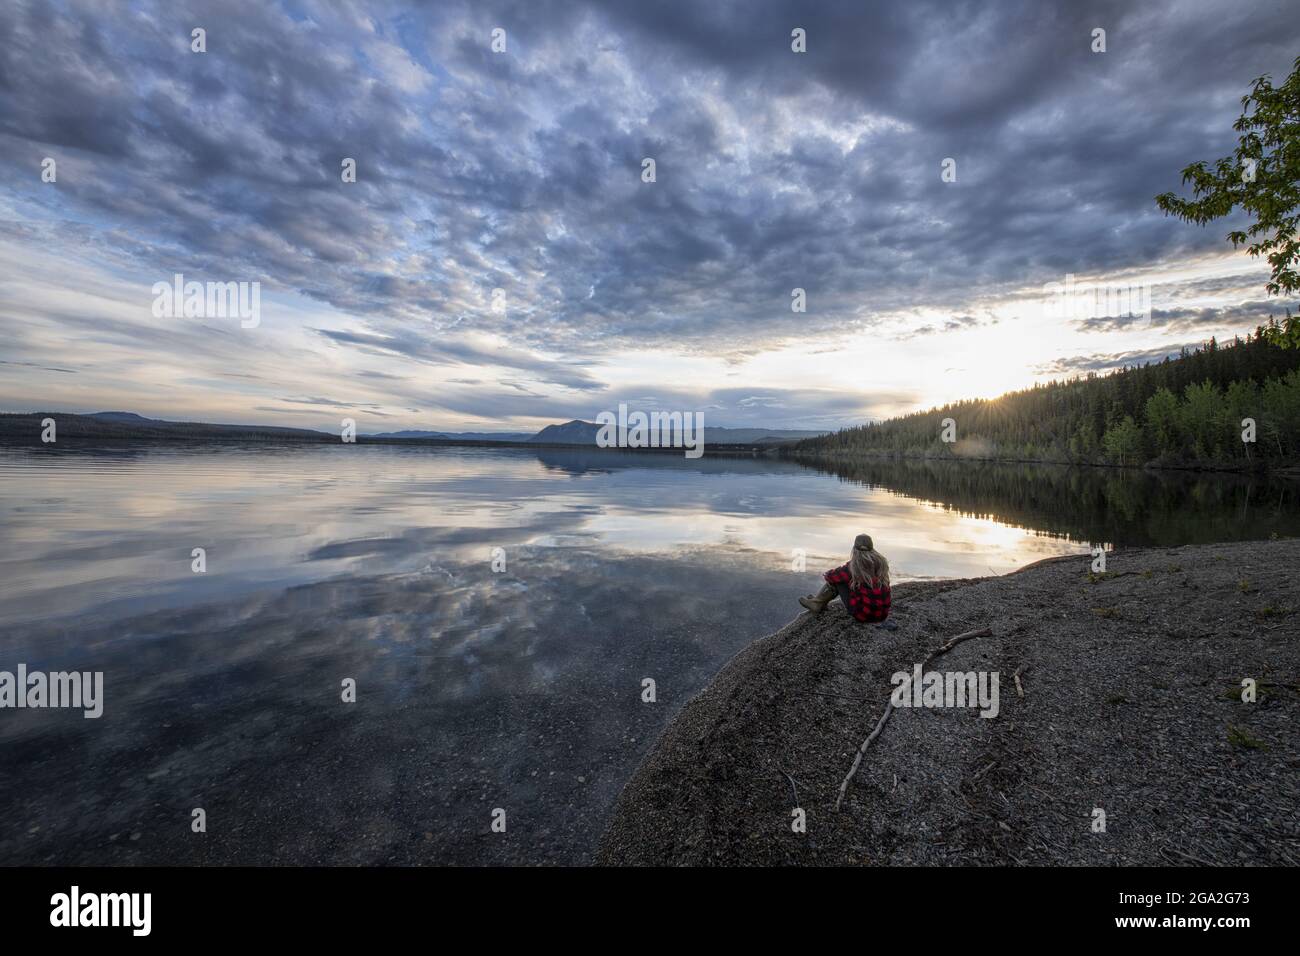 View taken from behind of a woman sitting alongside Little Salmon Lake at the water's edge enjoying the view during the late afternoon in the tradi... Stock Photo